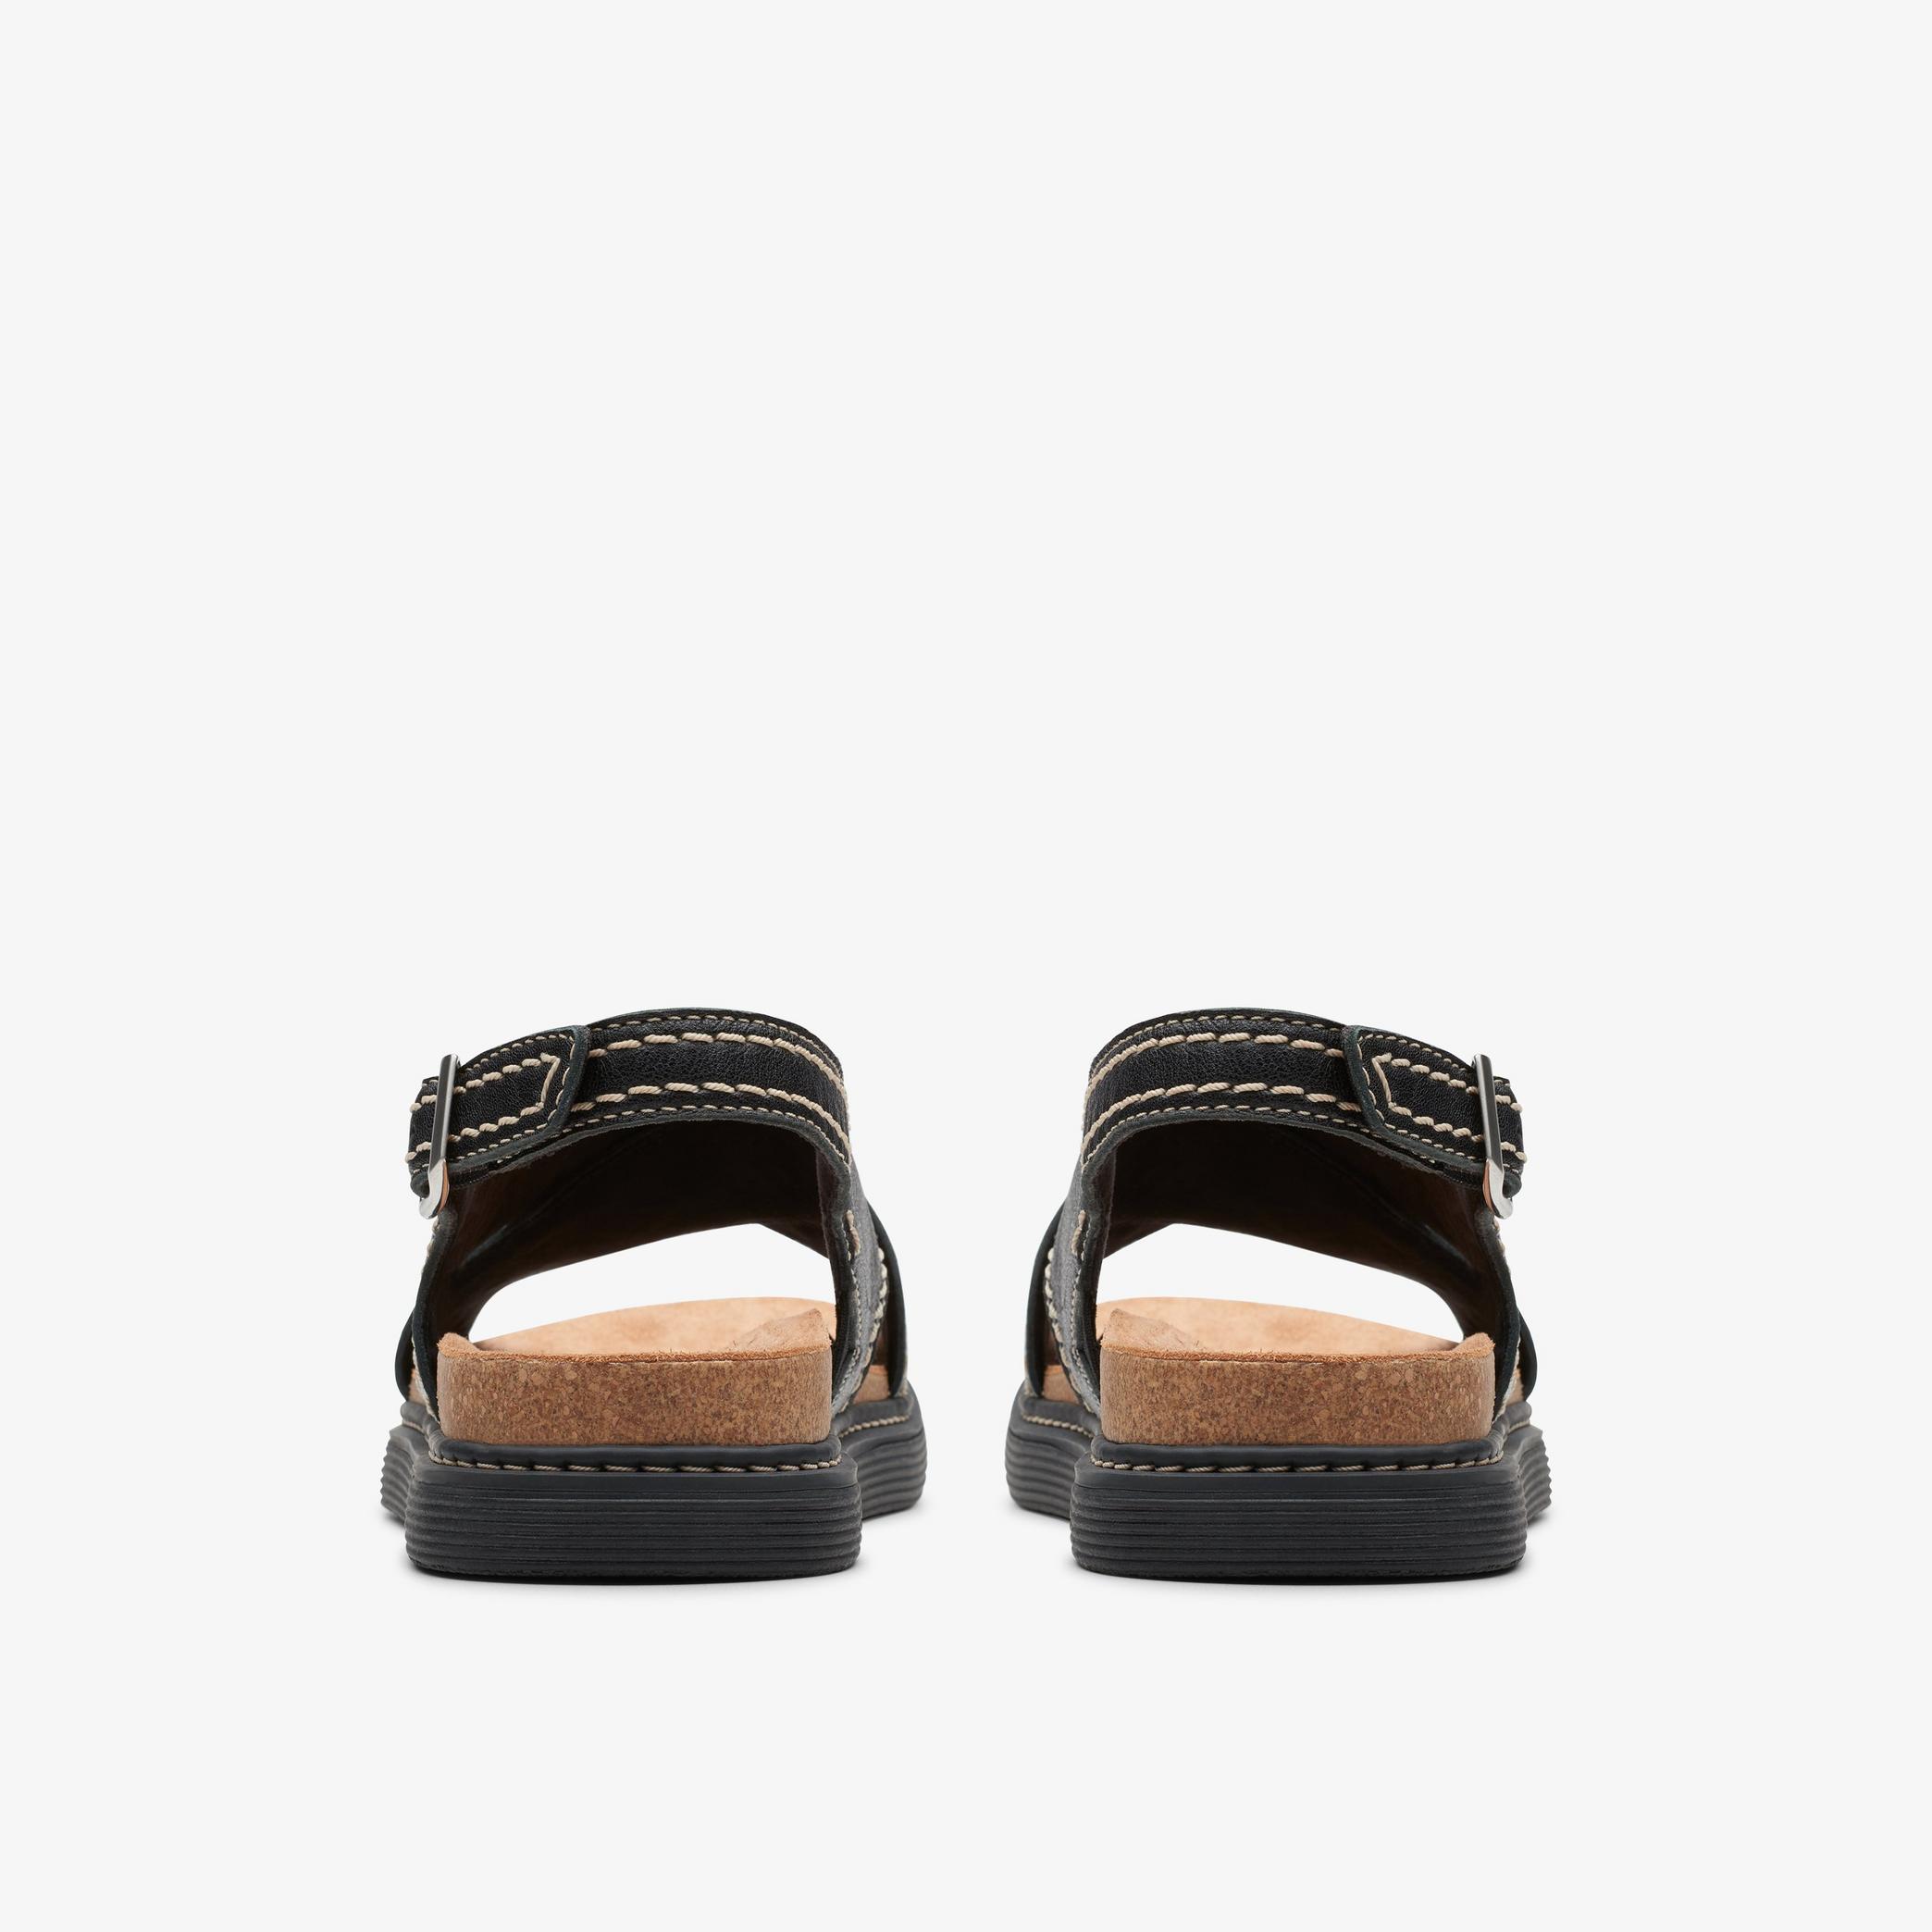 Arwell Sling Black Leather Flat Sandals, view 5 of 6